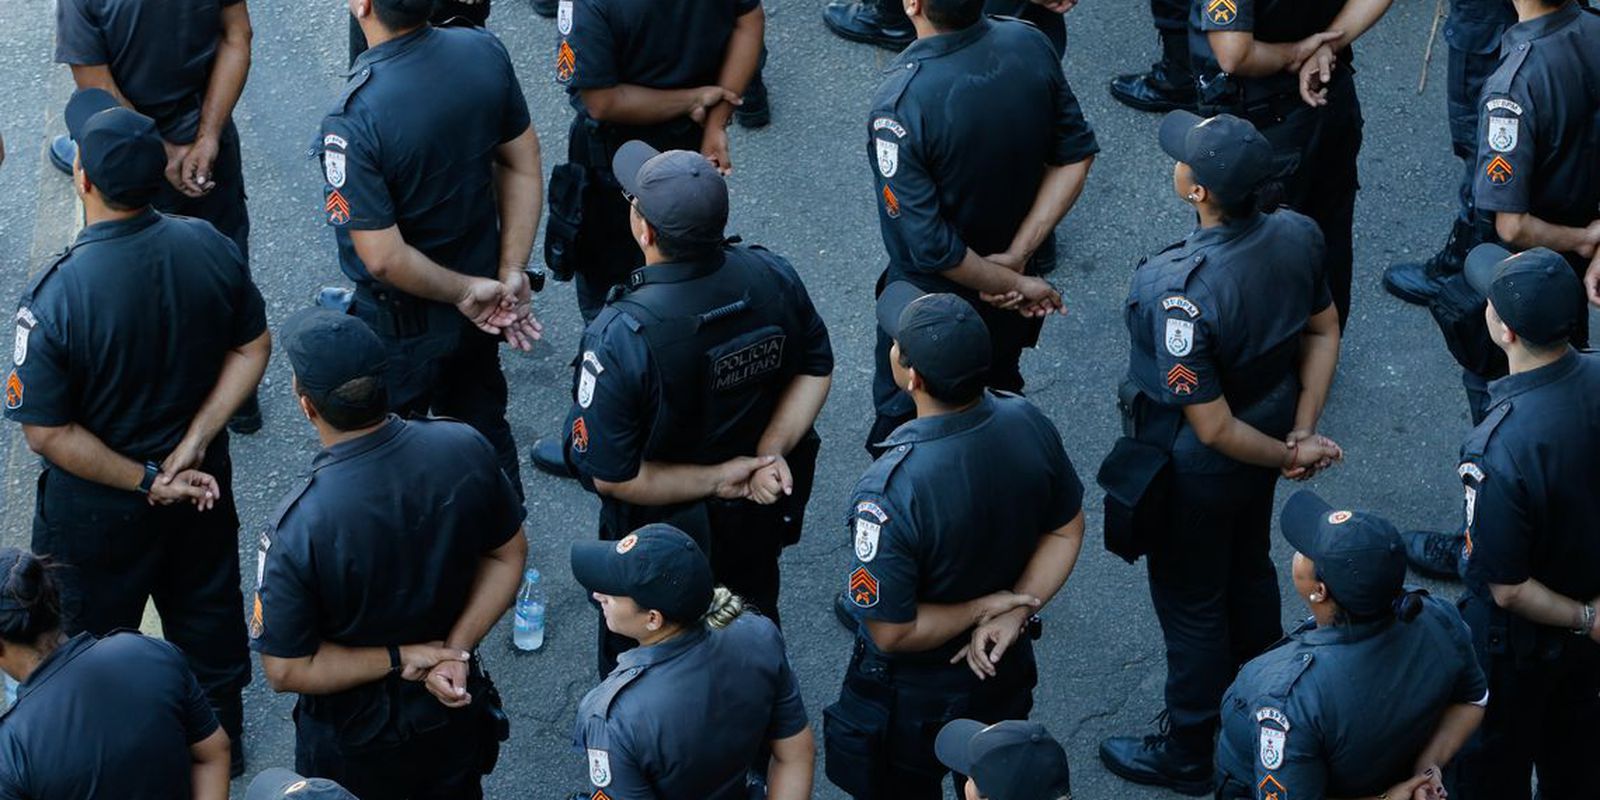 State of Rio will have cameras in police uniforms from Monday